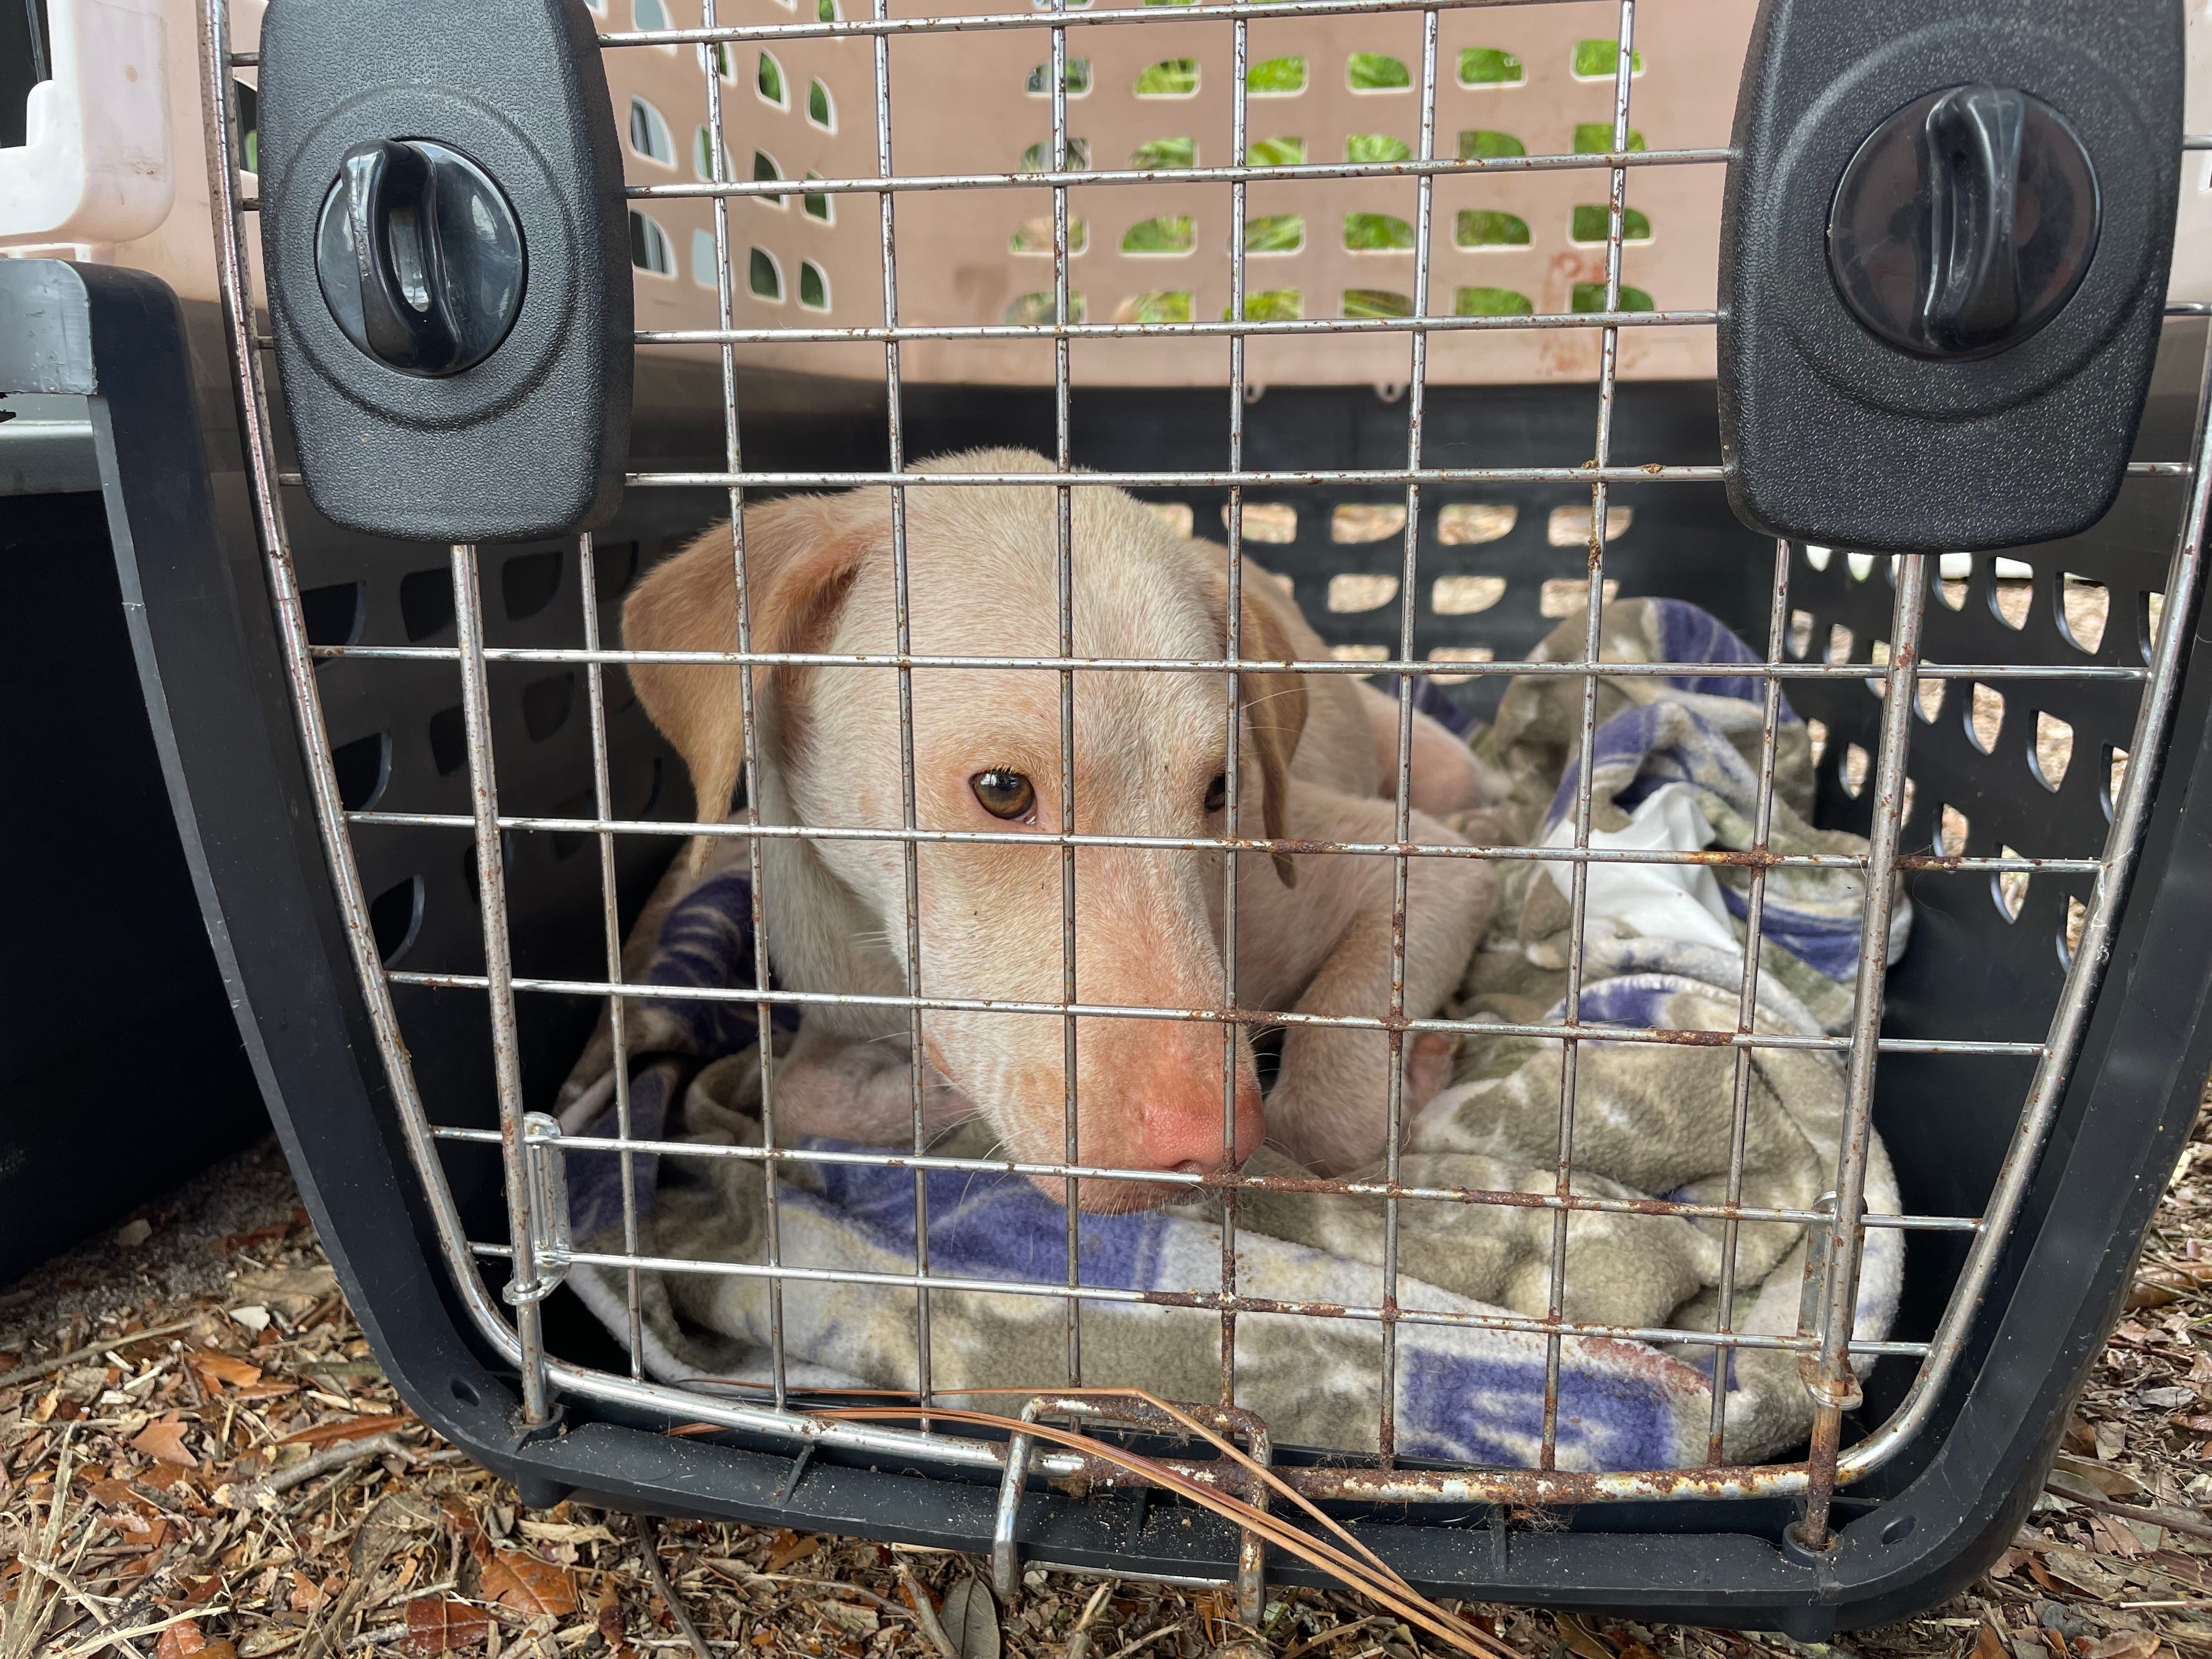 Santa Rosa County animal hoarding: 50 dogs caught, spayed and neutered